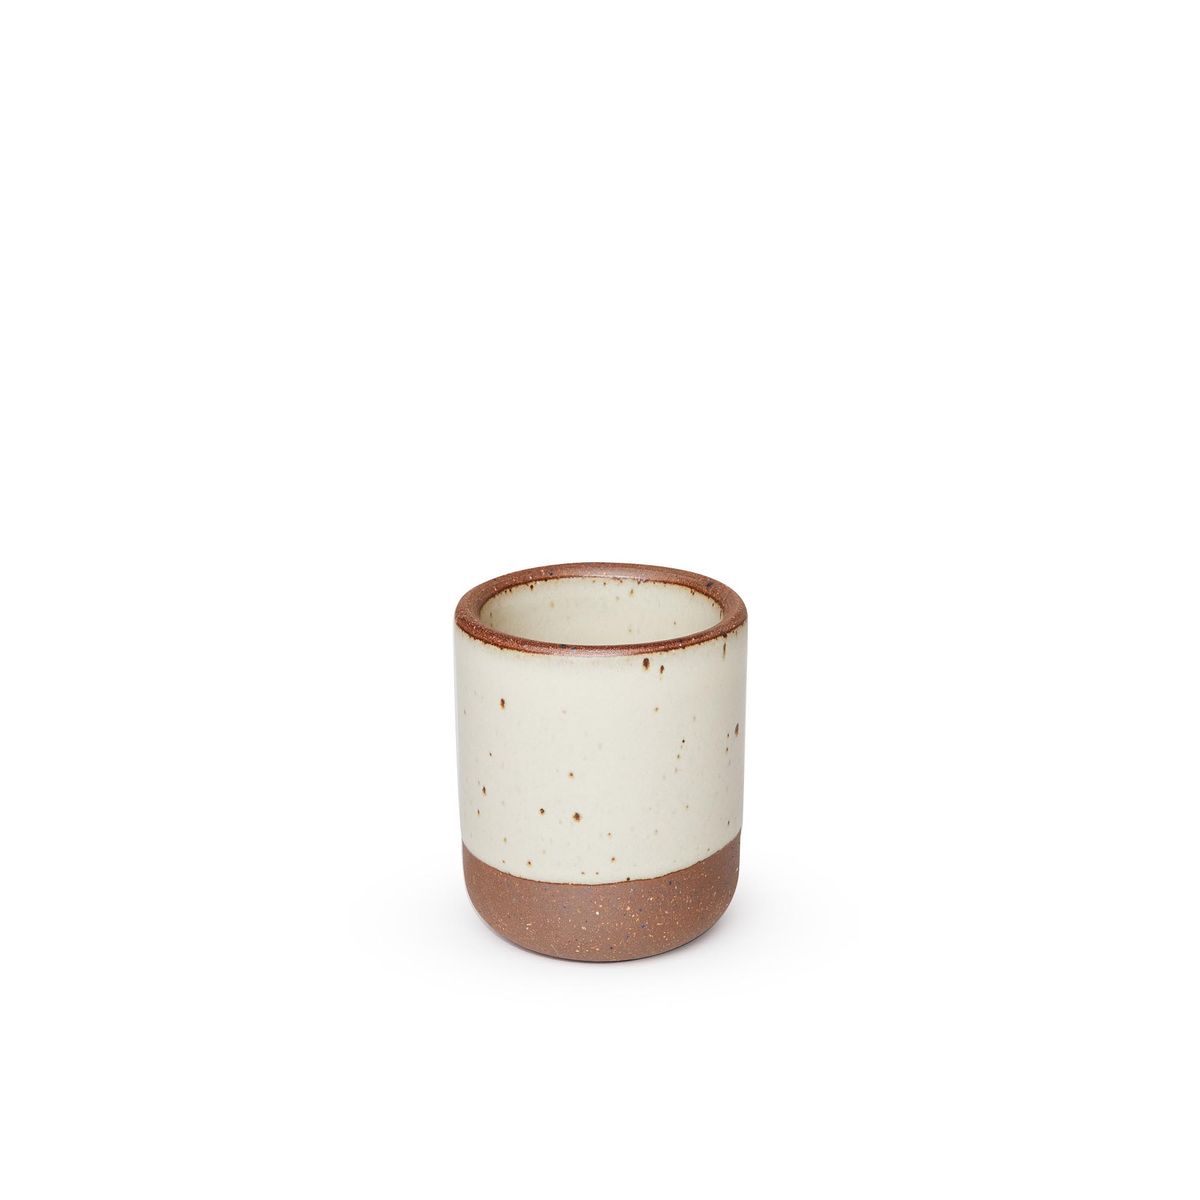 A small, short ceramic mug cup in a warm, tan-toned, off-white color featuring iron speckles and unglazed rim and bottom base.